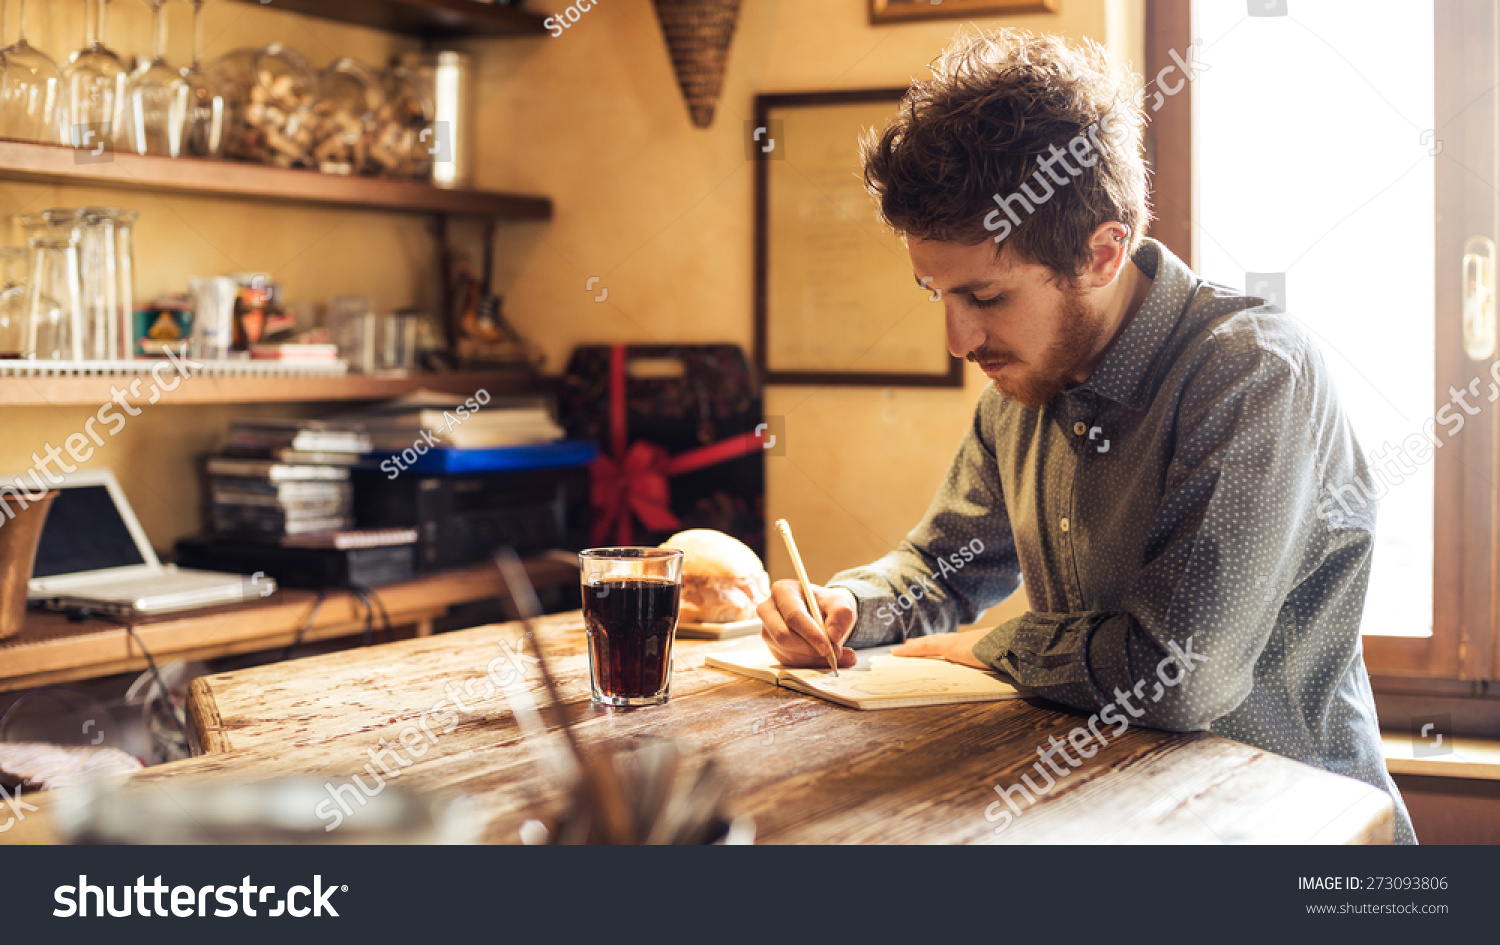 Young hipster man sketching on a notebook in his studio on a rustic wooden table #273093806